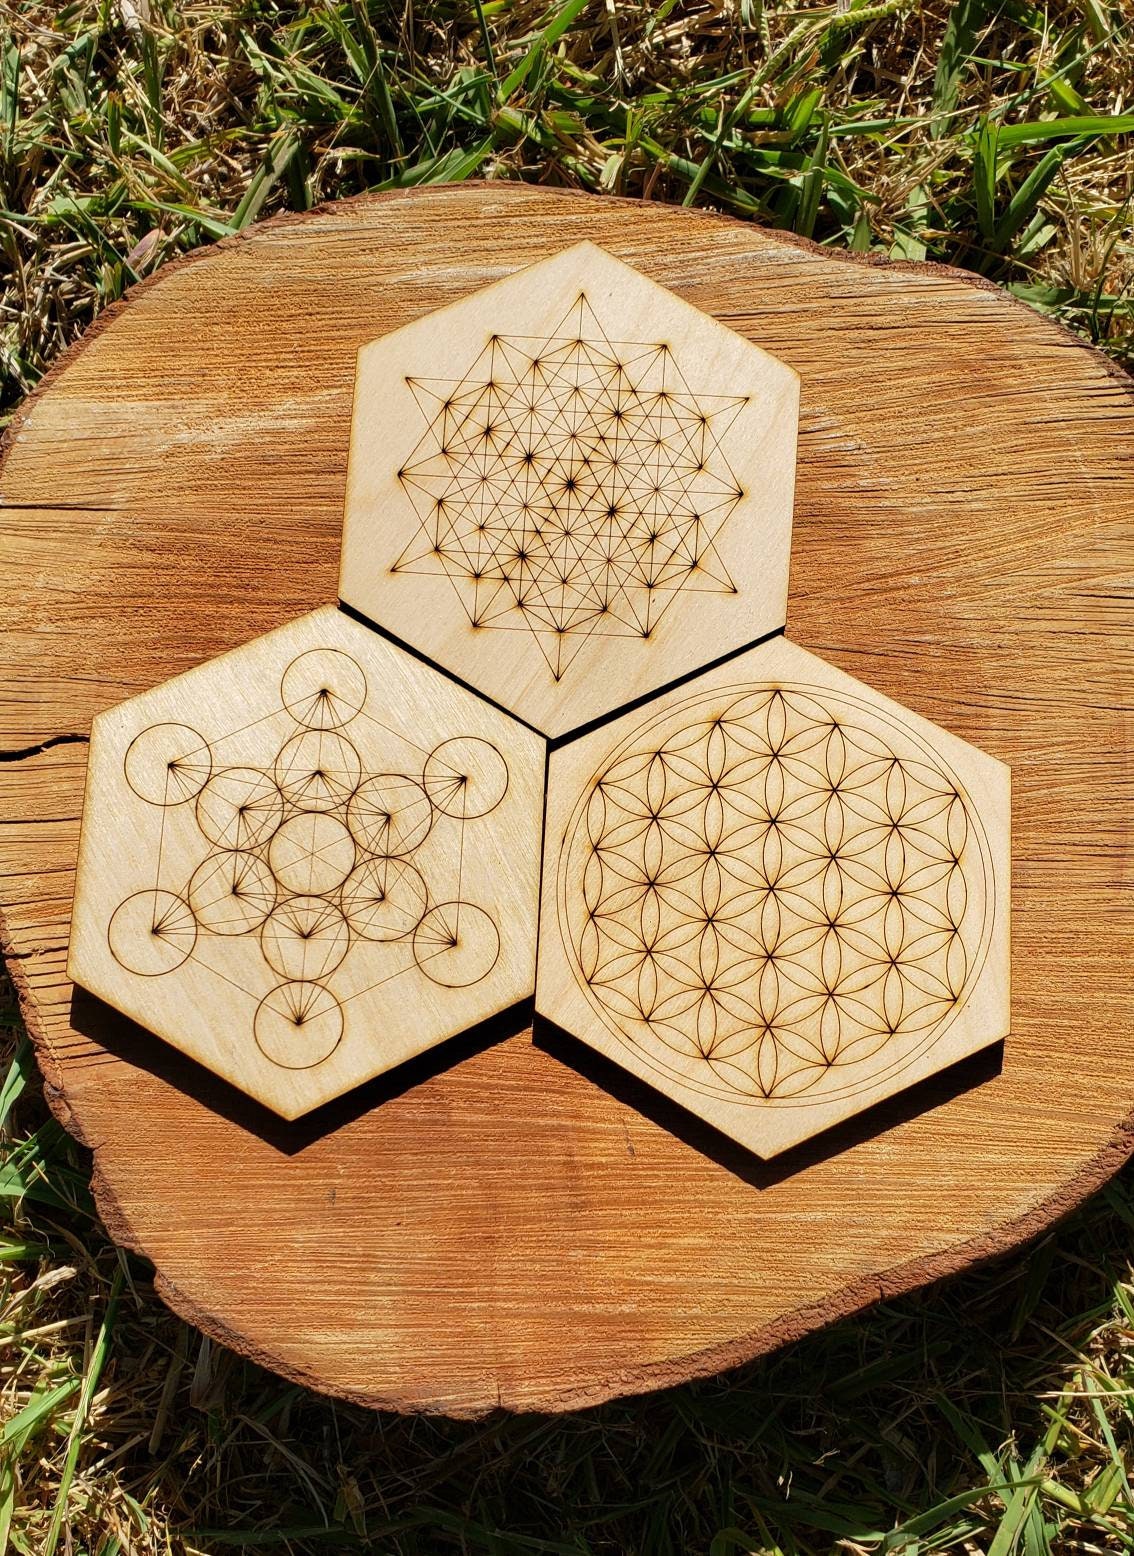 ONE Sacred Geometry Coaster or Mini Crystal Grid - Flower Of Life, 64 Tetrahedron, Metatron - LaserEngraved from Sustainably Grown Wood